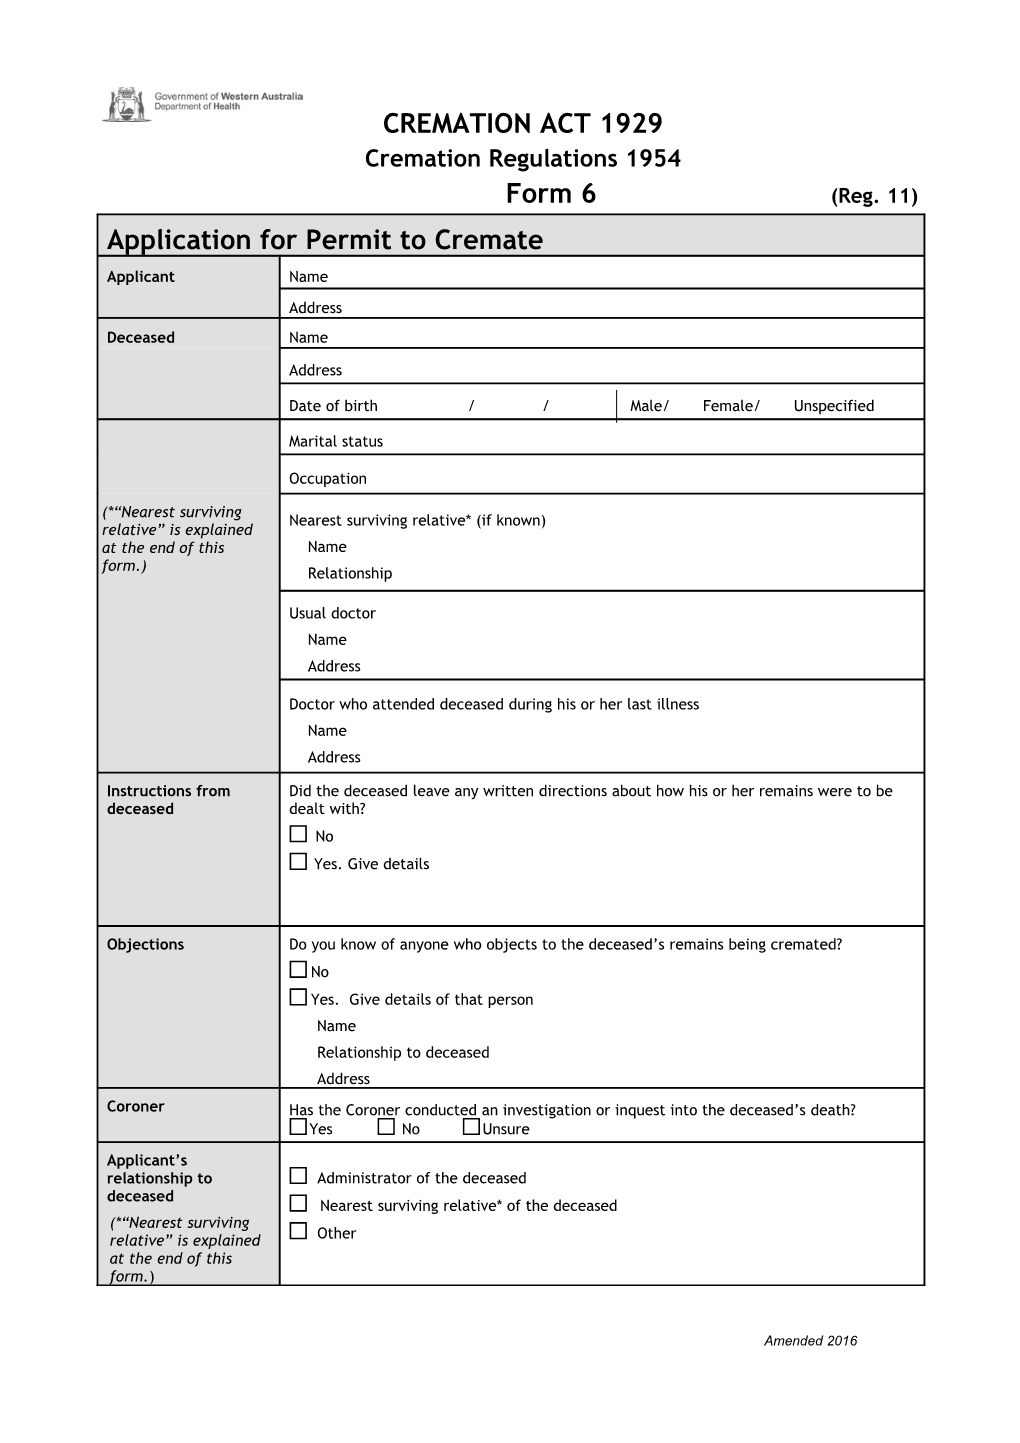 Form 6: Application for Permit to Cremate